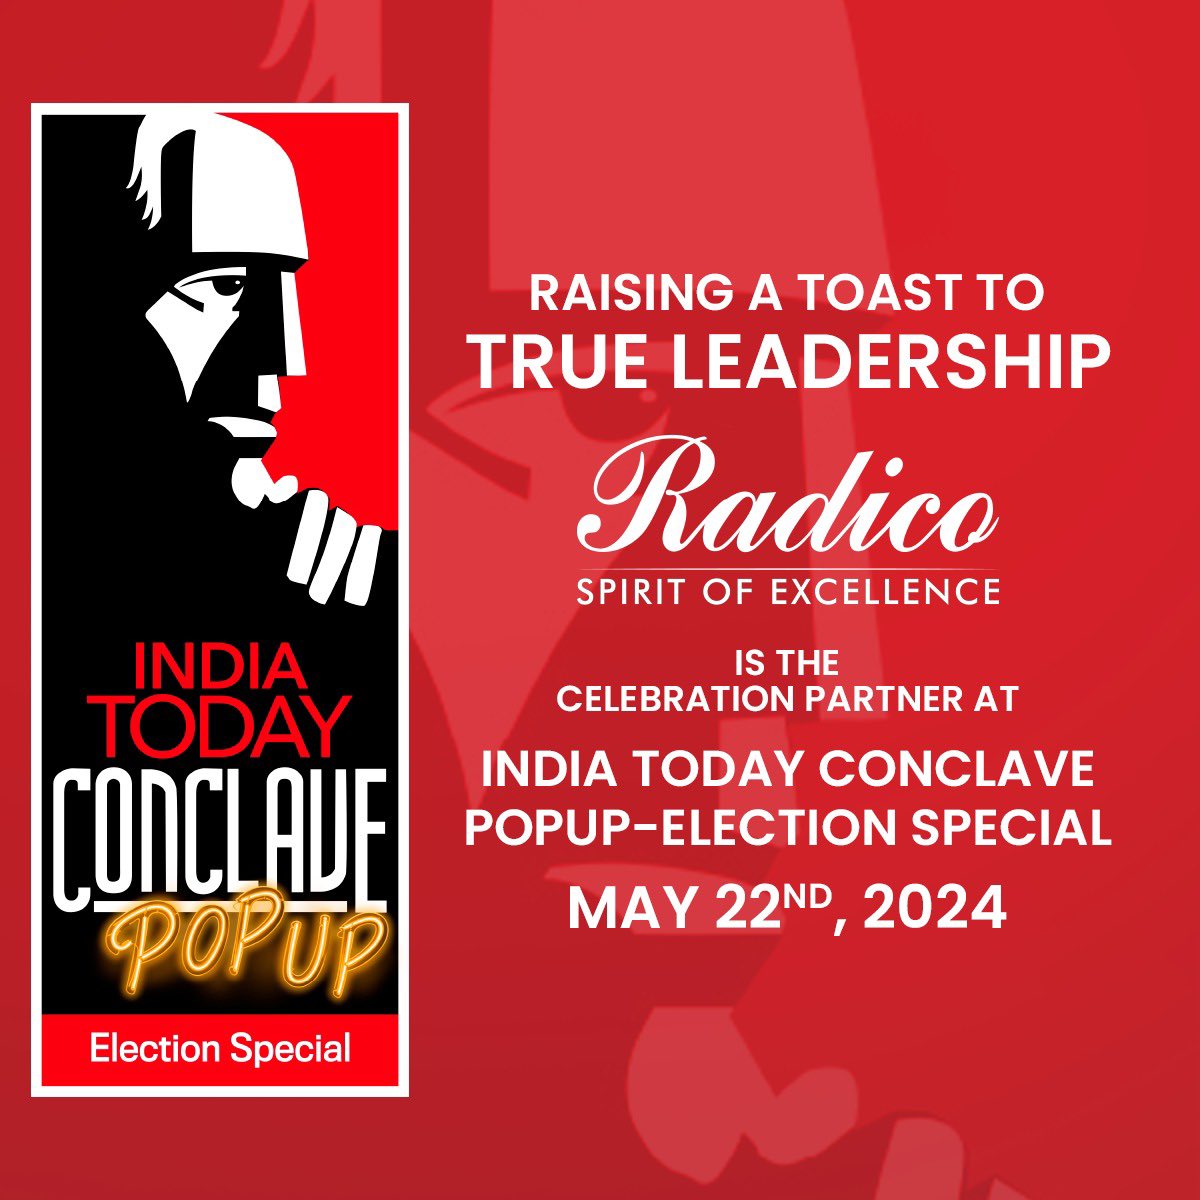 Radico Khaitan Limited is proud to announce that we are the Celebration Partner for the India Today Conclave PopUp-Election Special, scheduled for 22nd May 2024 in Mumbai. This prestigious event aims to gather top bureaucrats, decision-makers, and experts to ideate and debate on